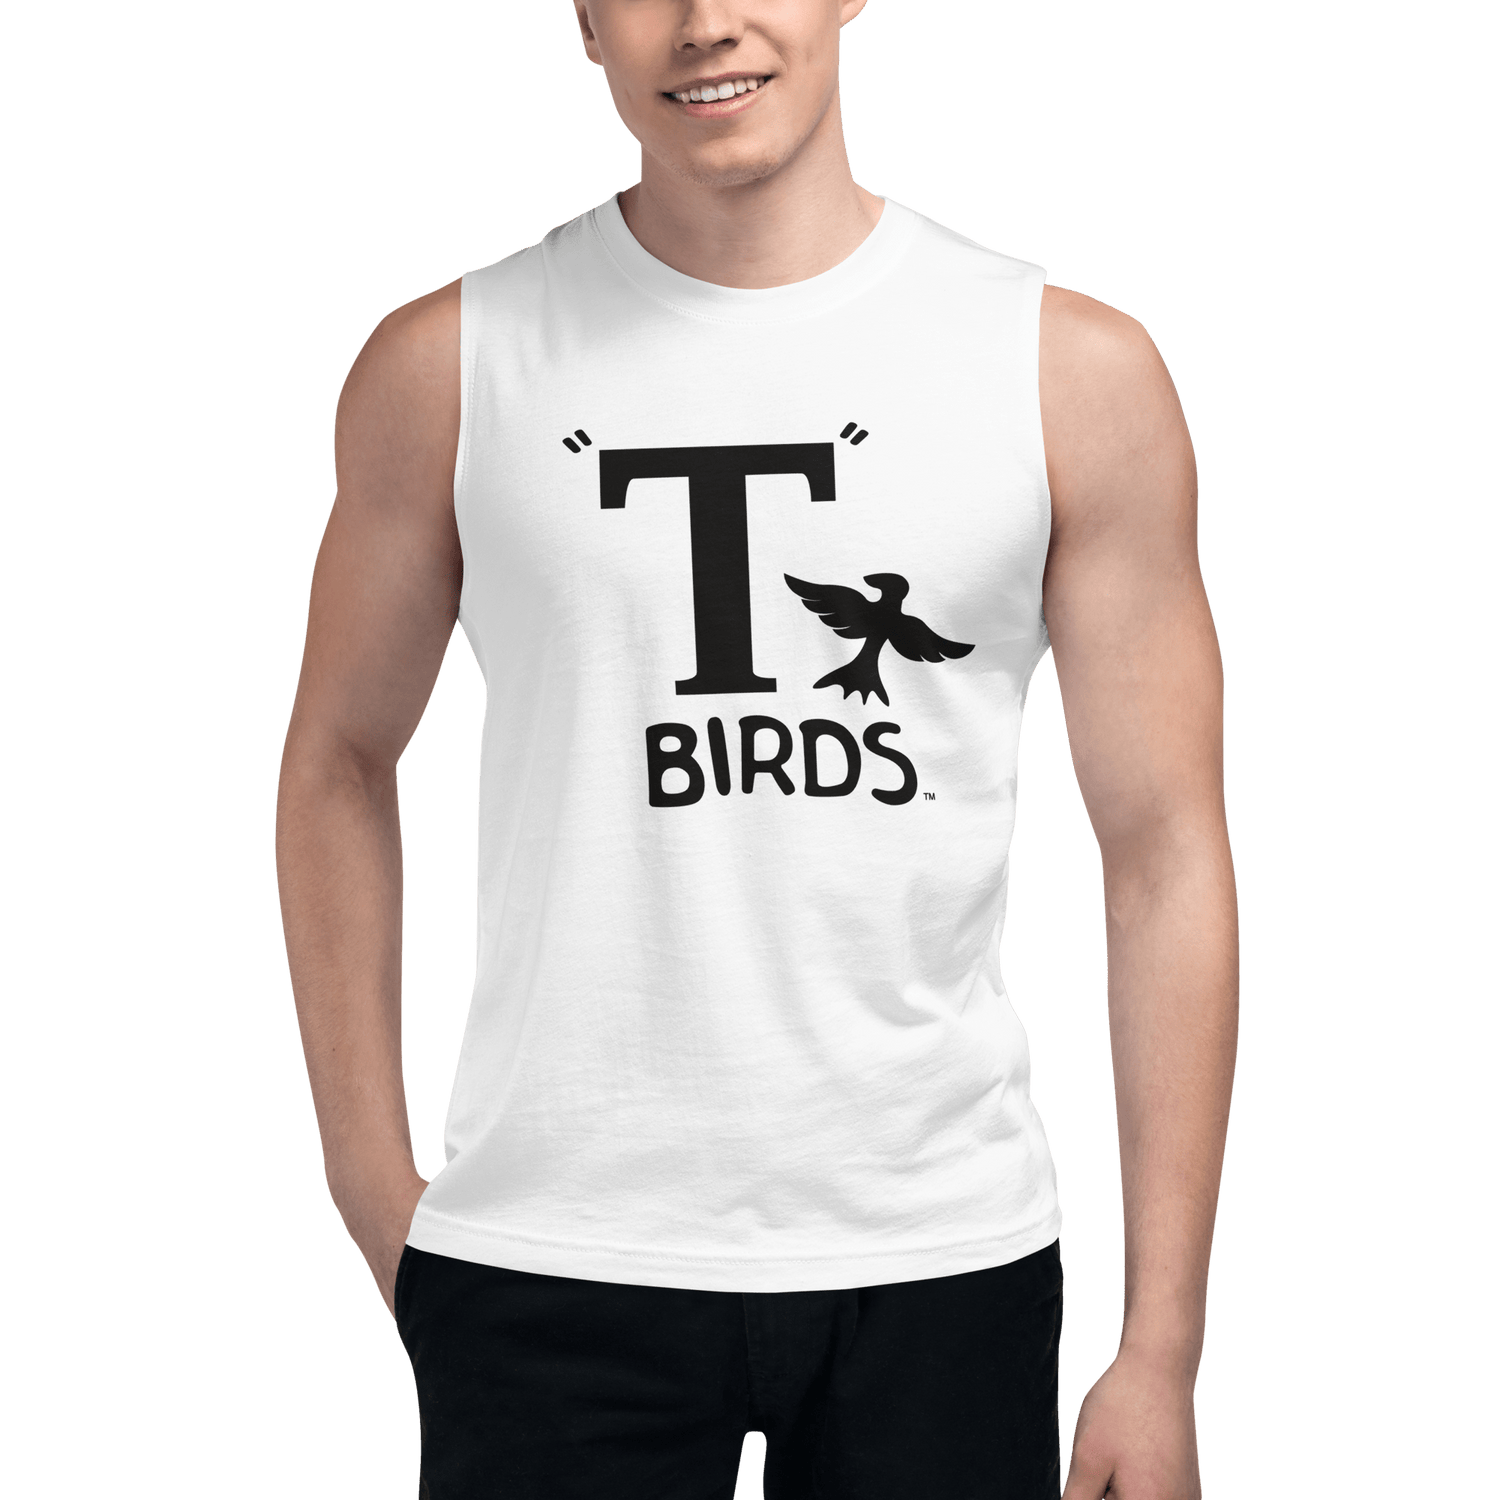 Grease T - Birds Unisex Muscle Tank Top - Paramount Shop